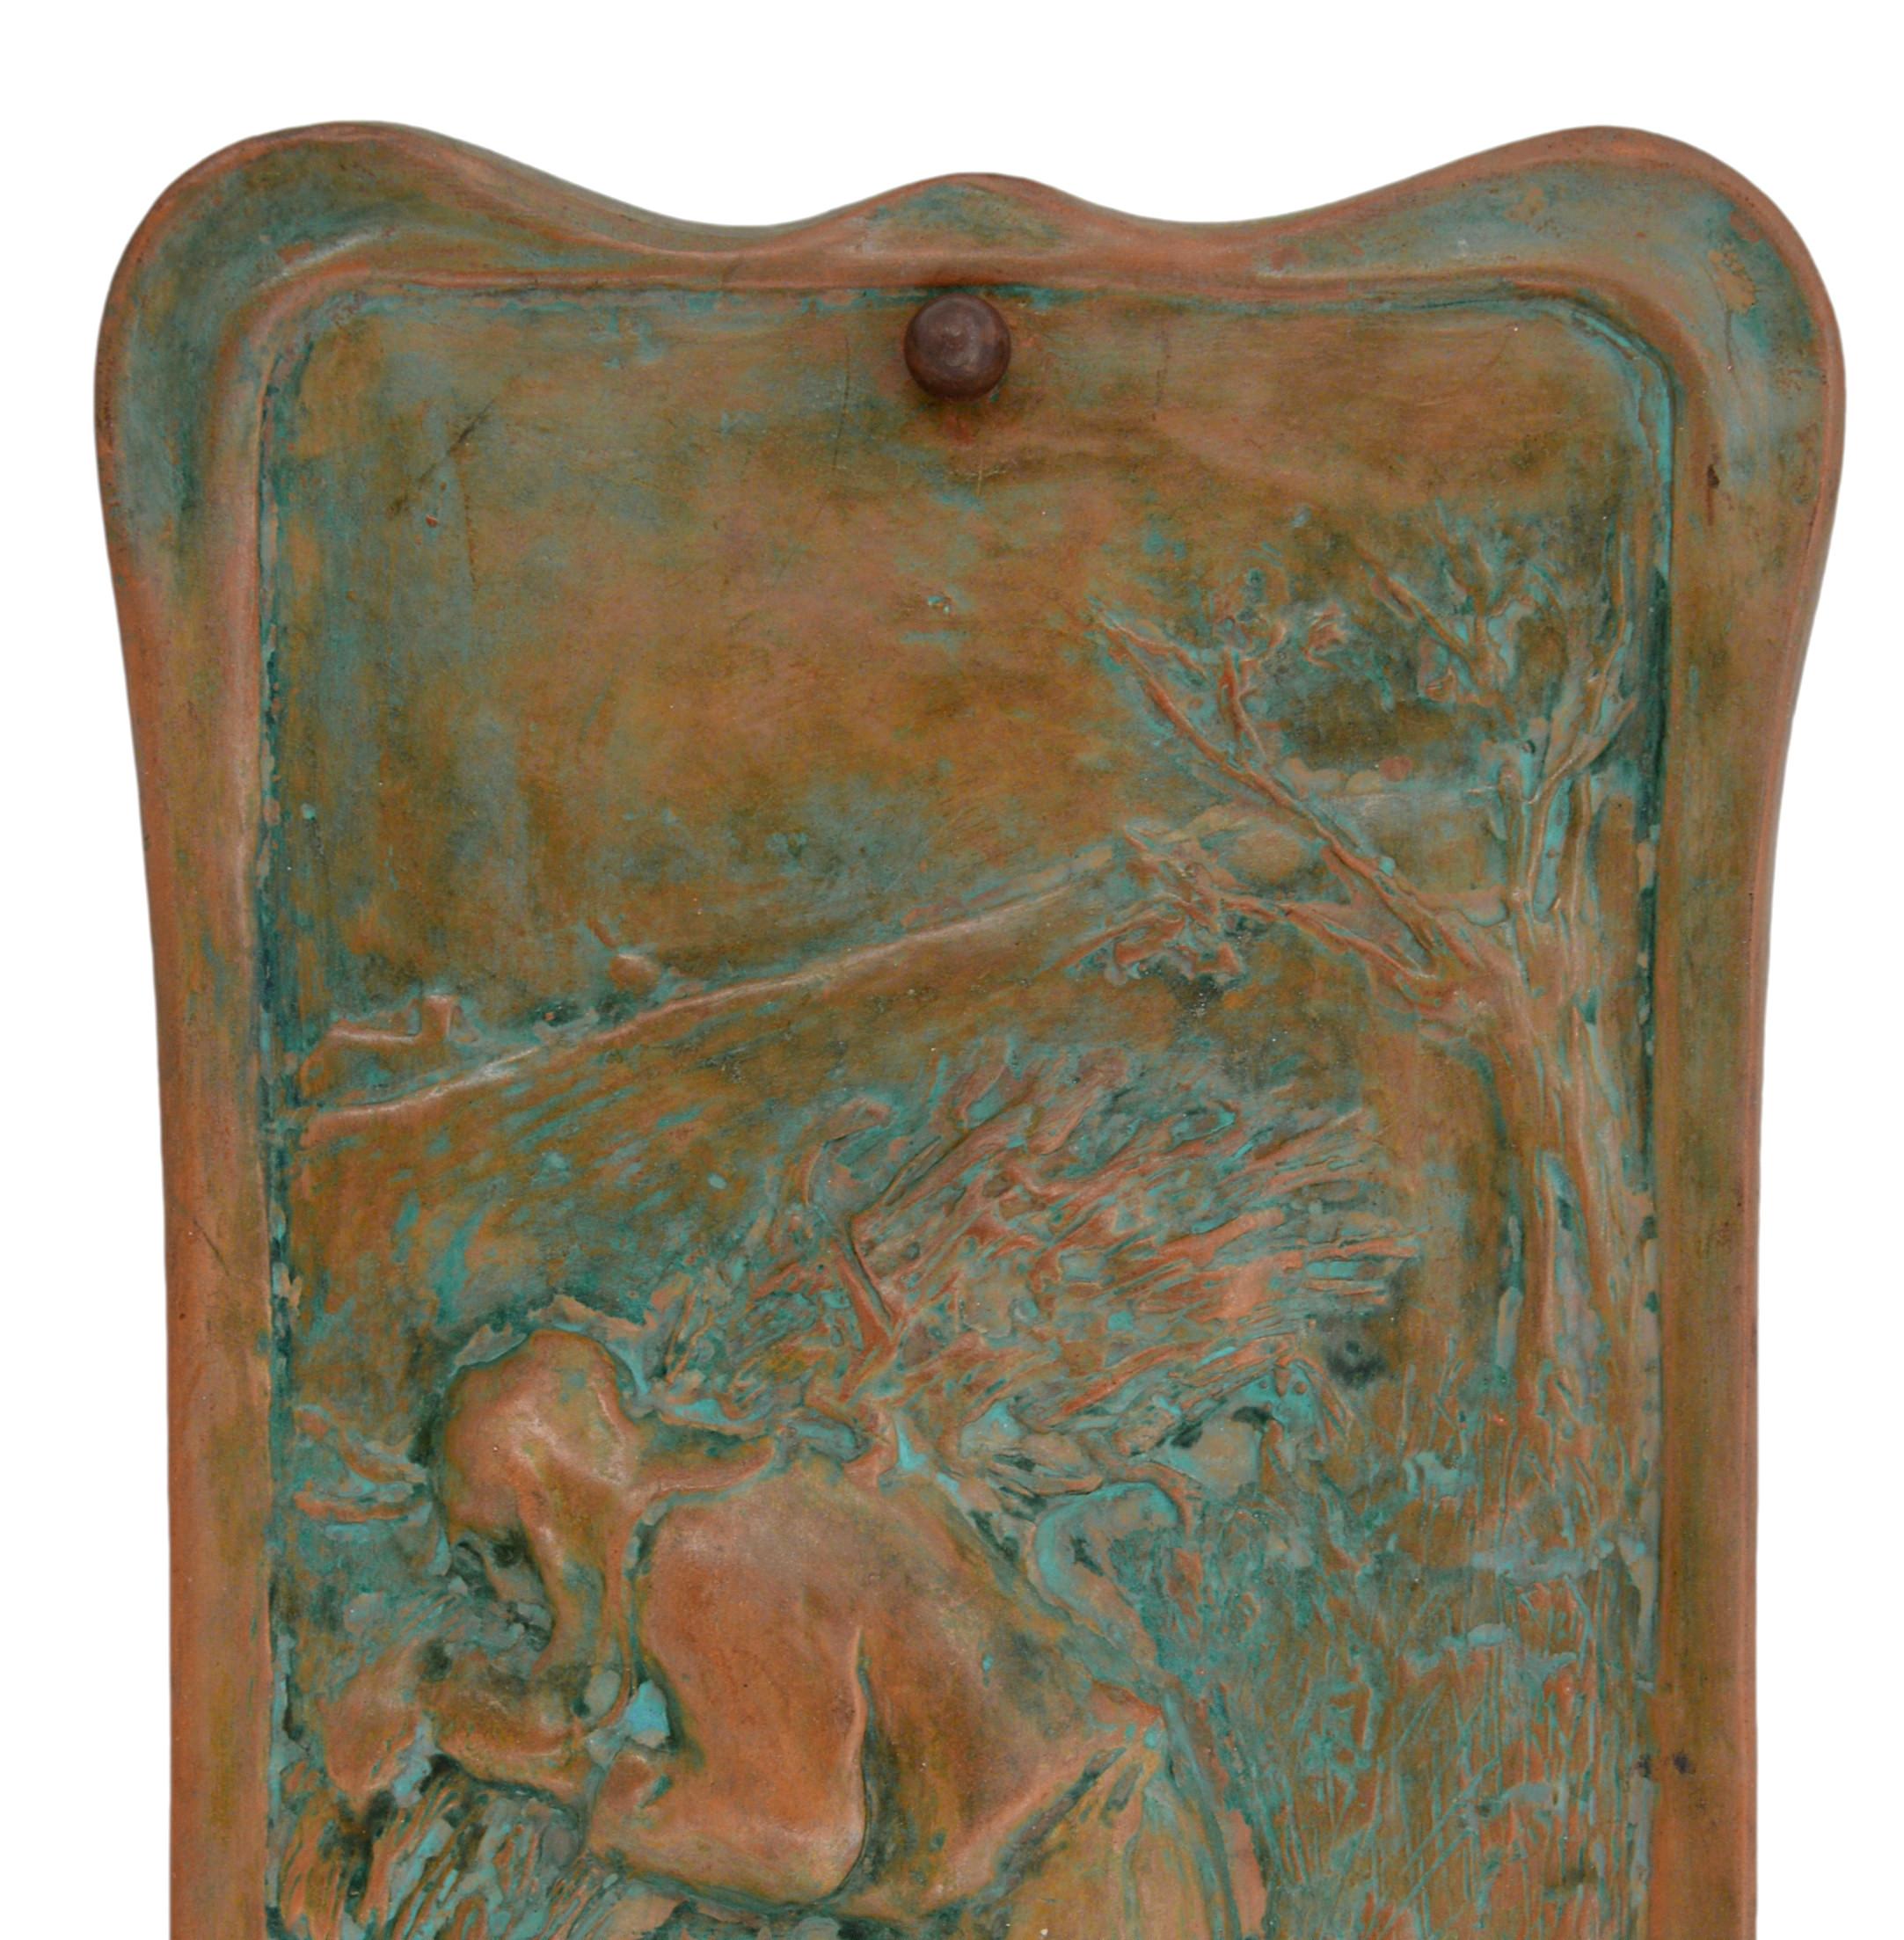 French Art Nouveau Terracotta Wall Plaque, Early 20th Century In Excellent Condition For Sale In Saint-Amans-des-Cots, FR